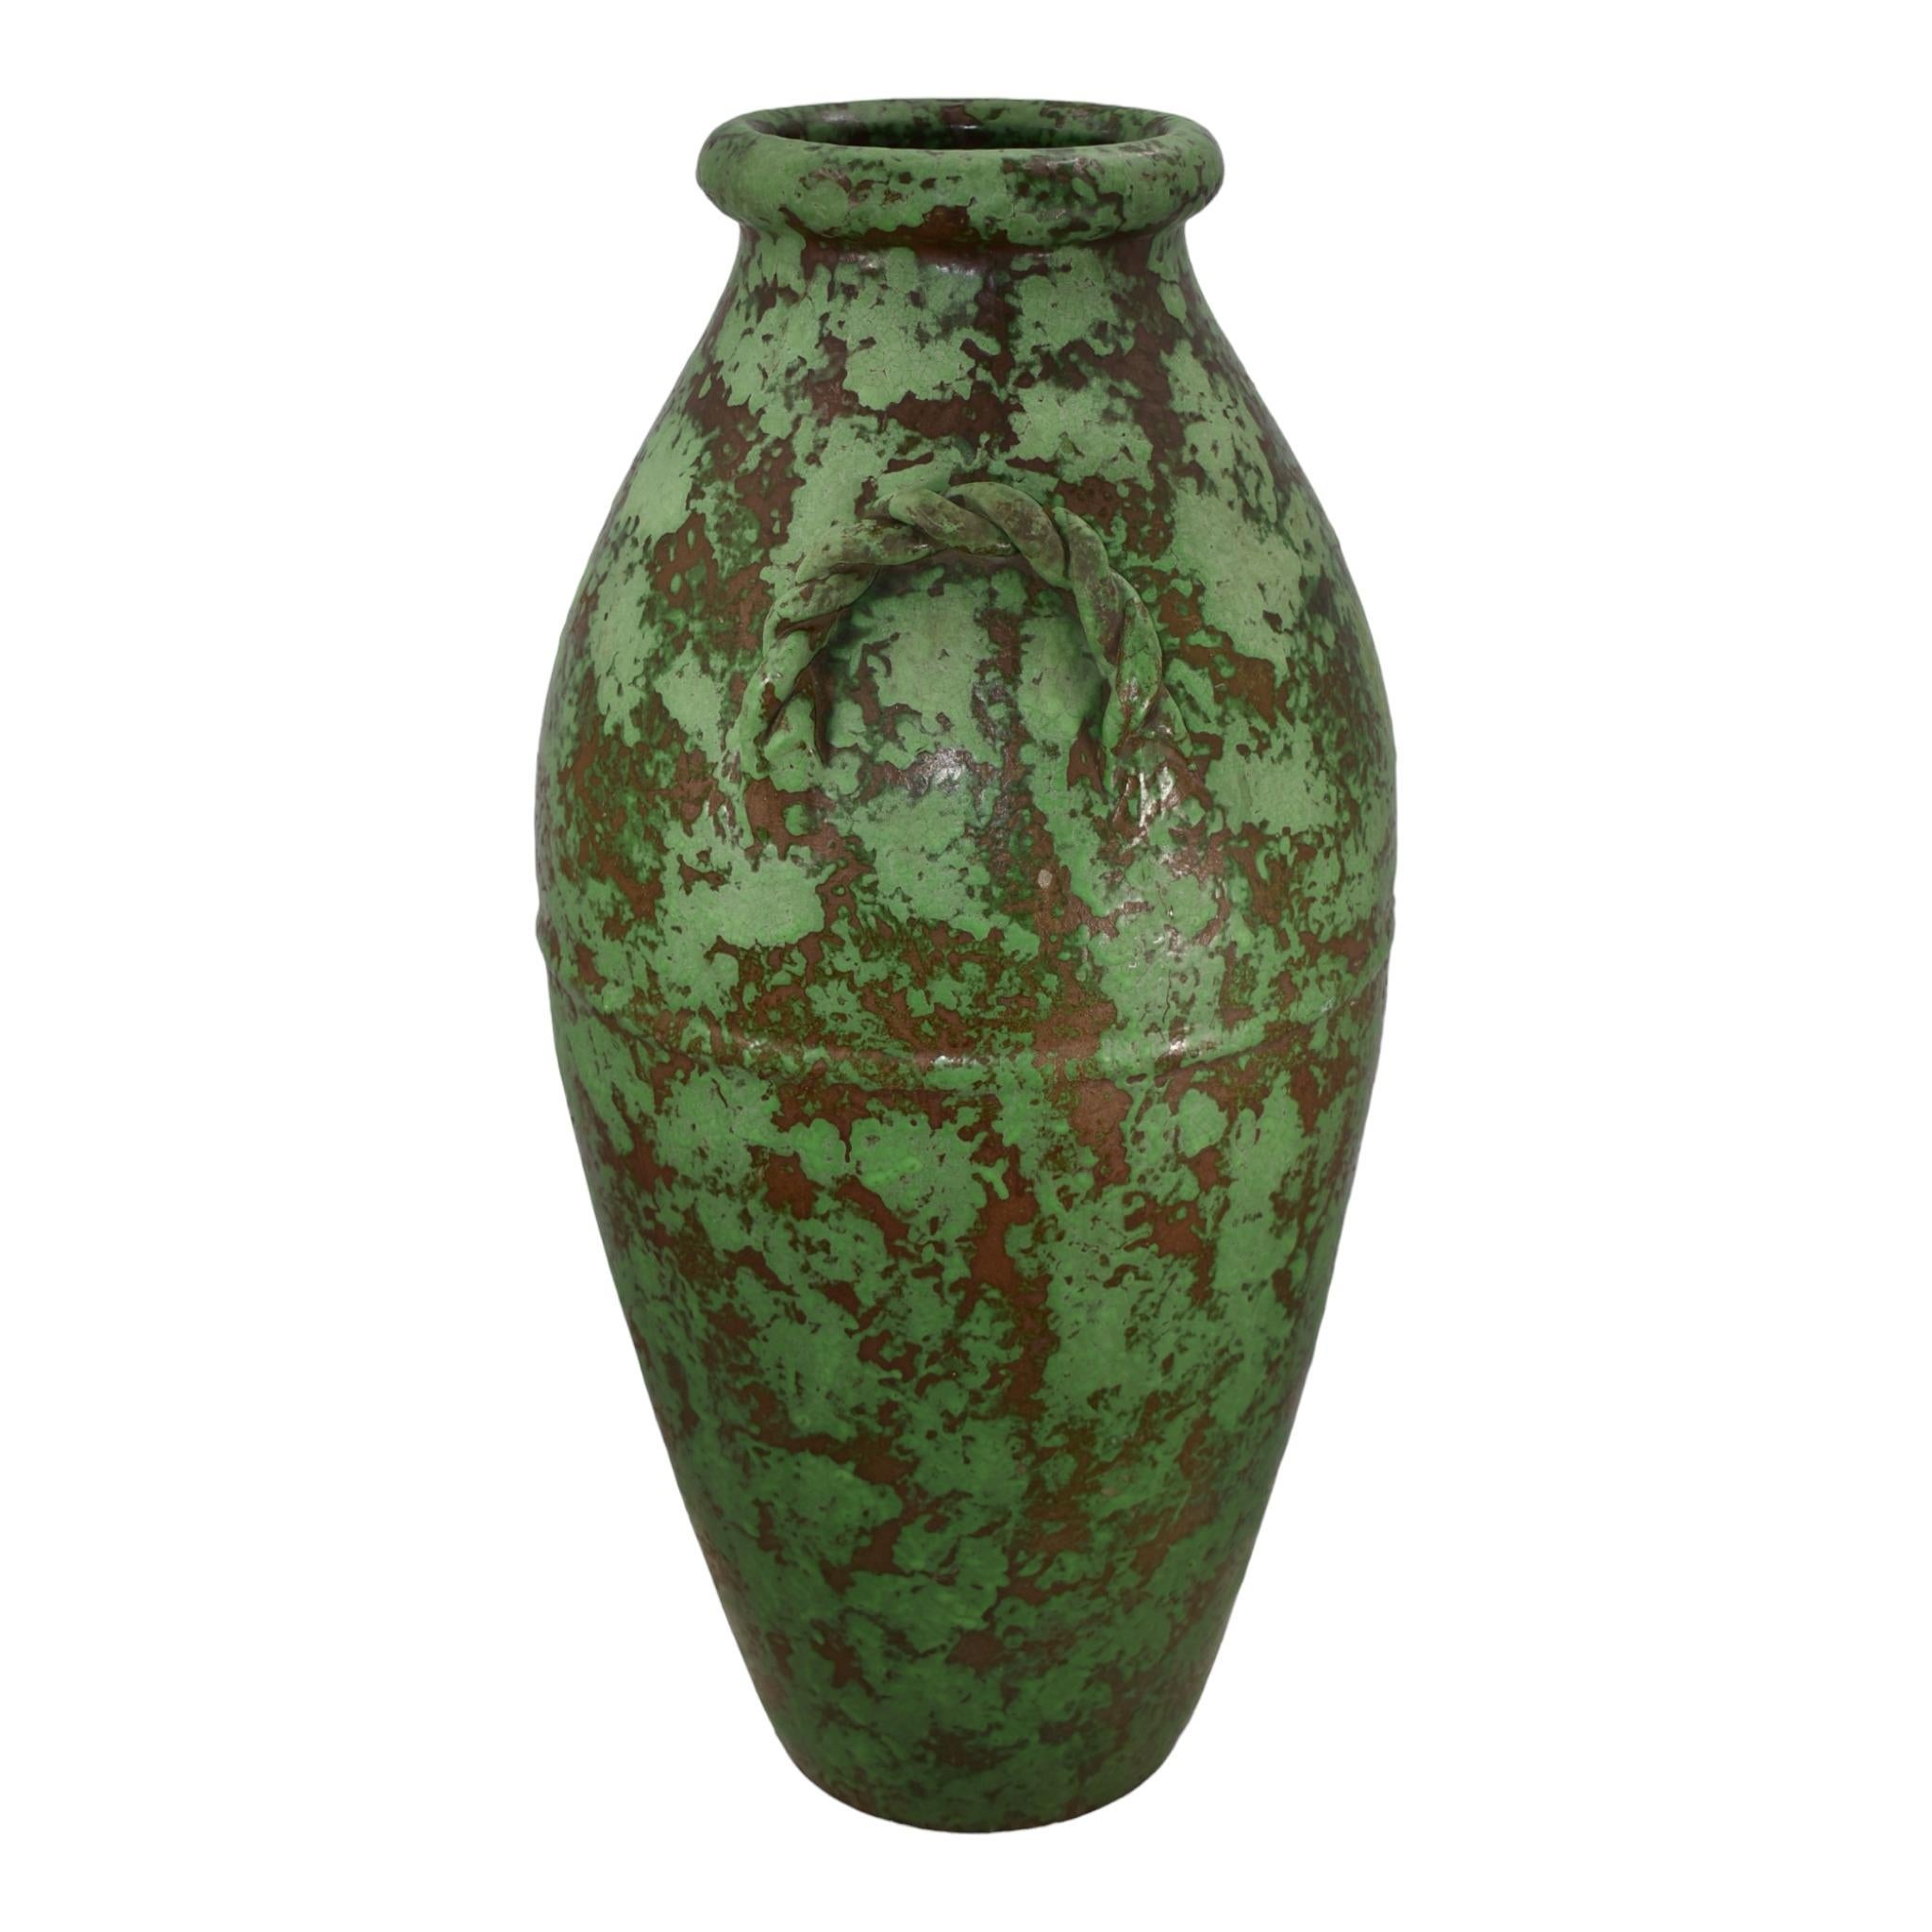 Weller Coppertone 1920s Vintage Arts and Crafts Pottery Green Handled Floor Vase
Stunning and magnificent form with super color and glaze. 
Excellent original condition. No chips, cracks, damage or repair of any kind. 
Bottom marked with Weller